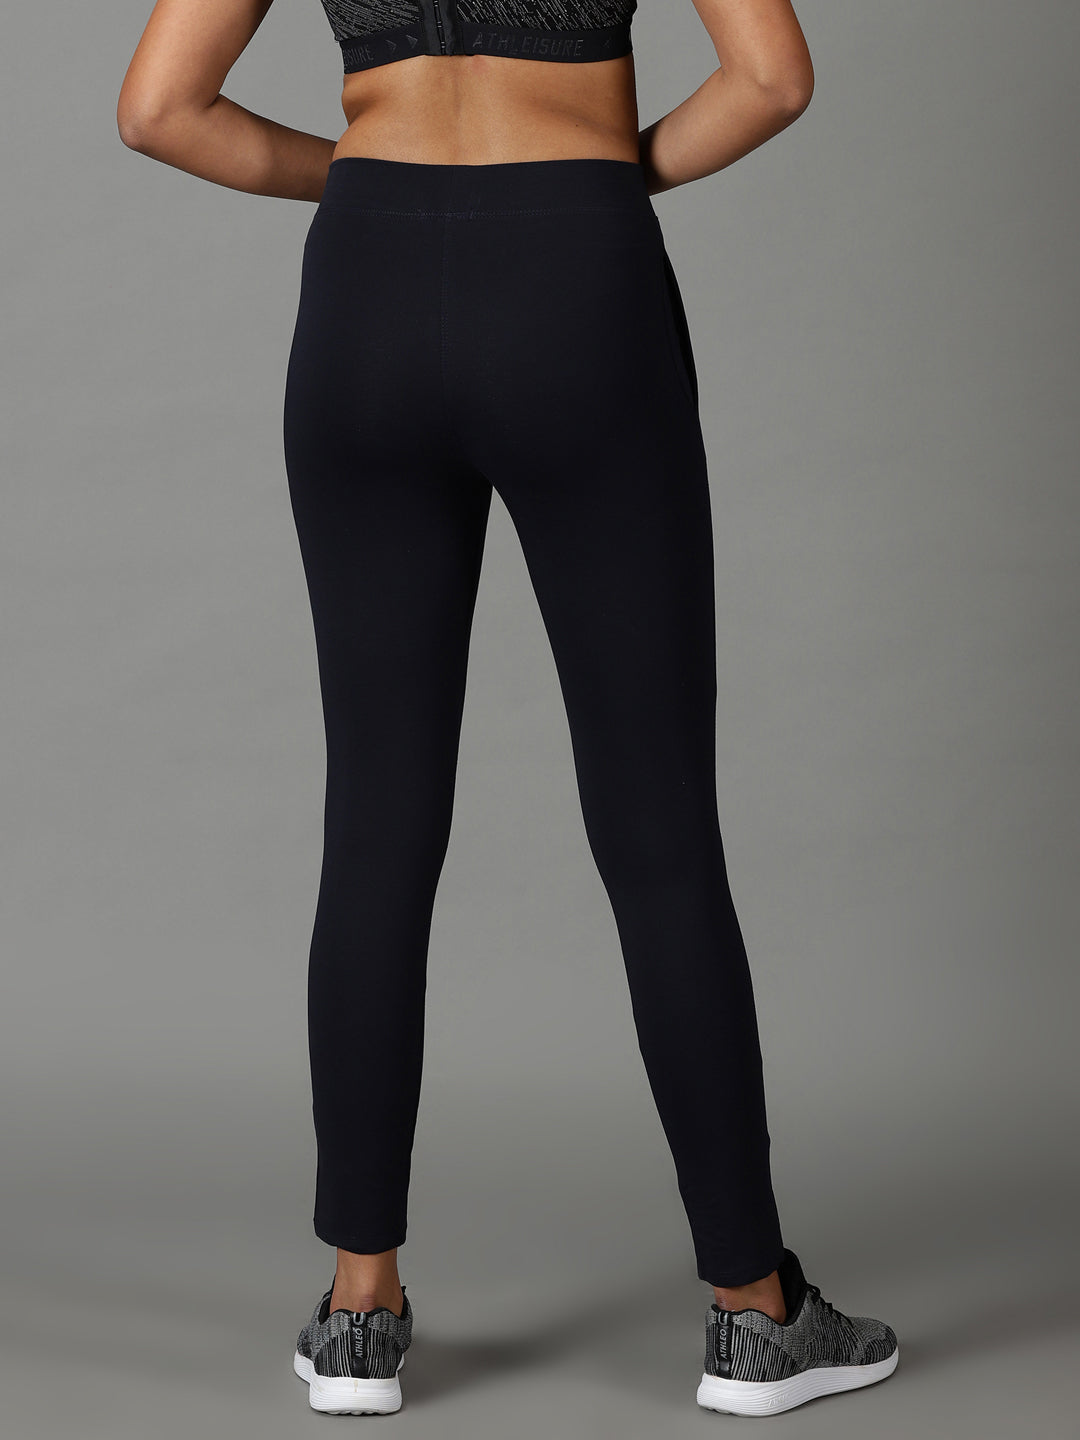 Women's Navy Blue Solid Track Pant